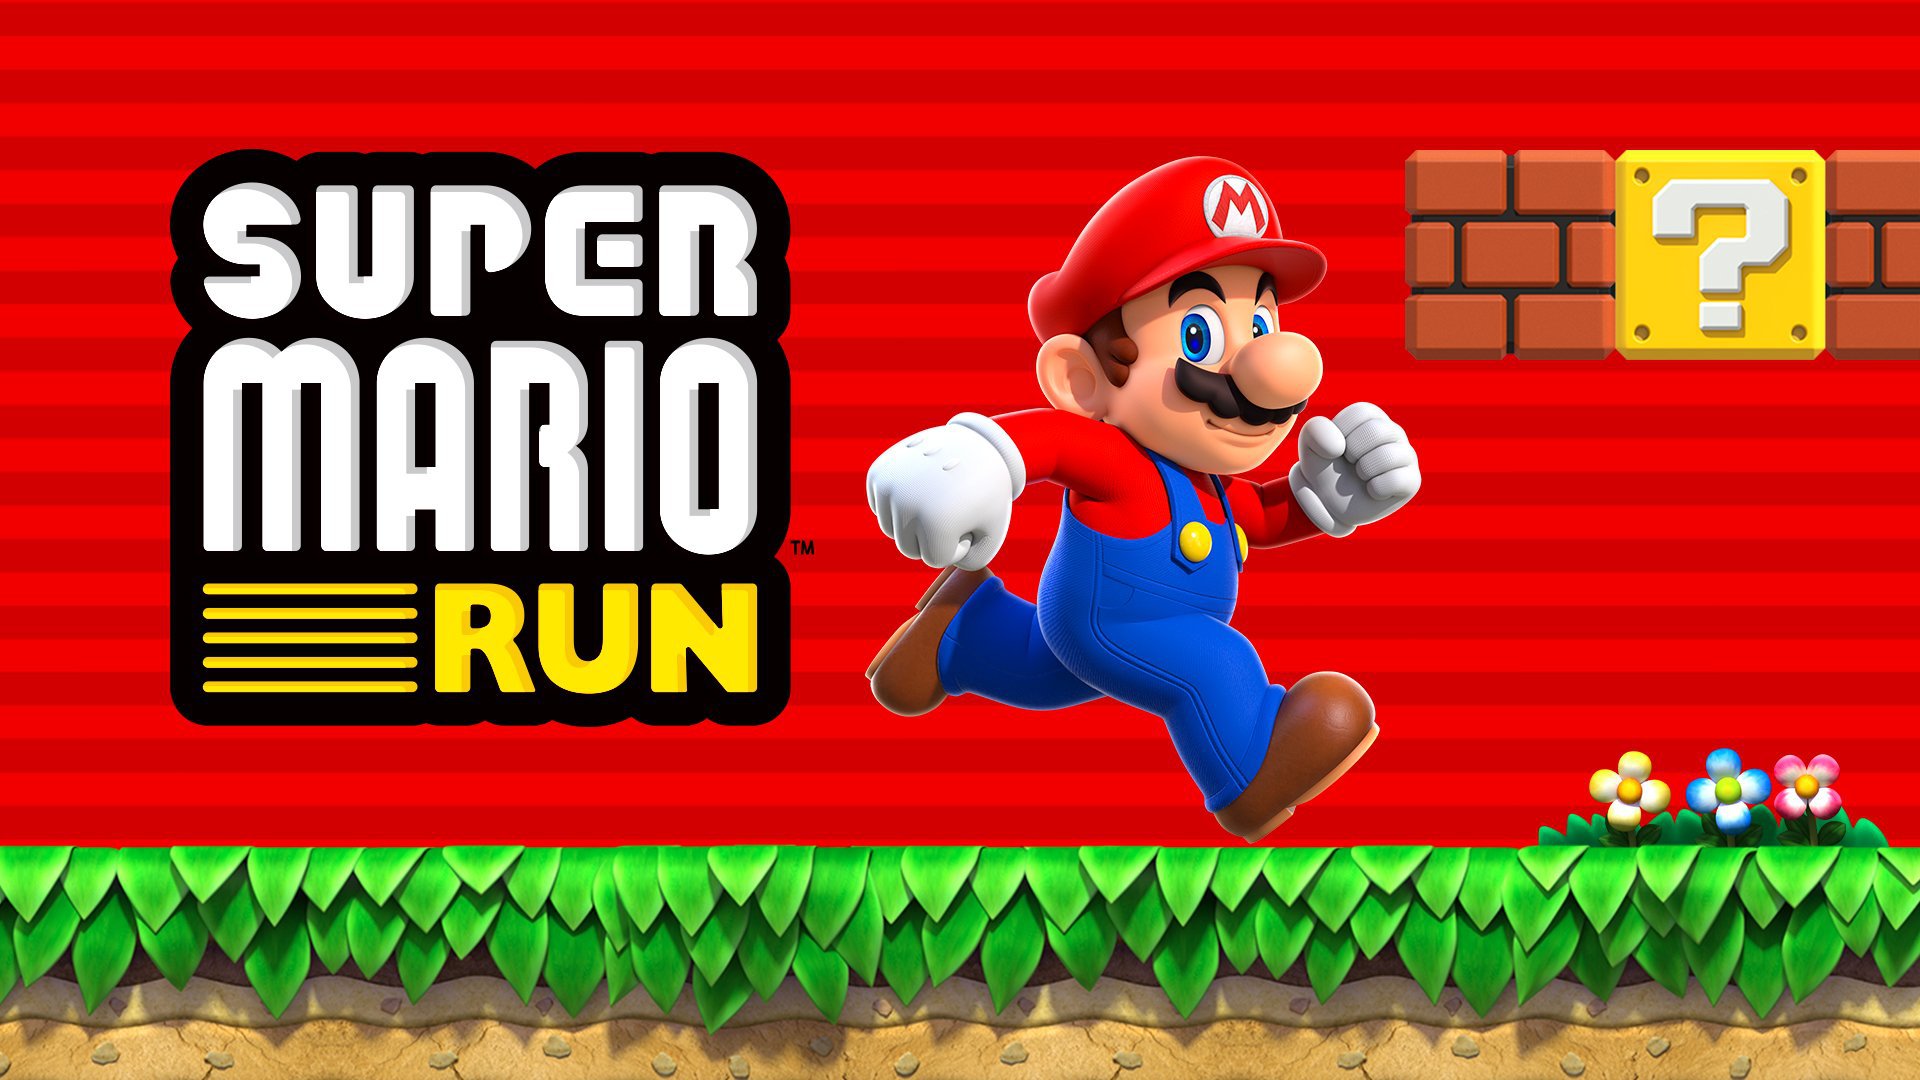 How to Play Super Mario Run on Rooted Android Device - Android - Now, we discuss How to Play Super Mario Run on Rooted Android Device.